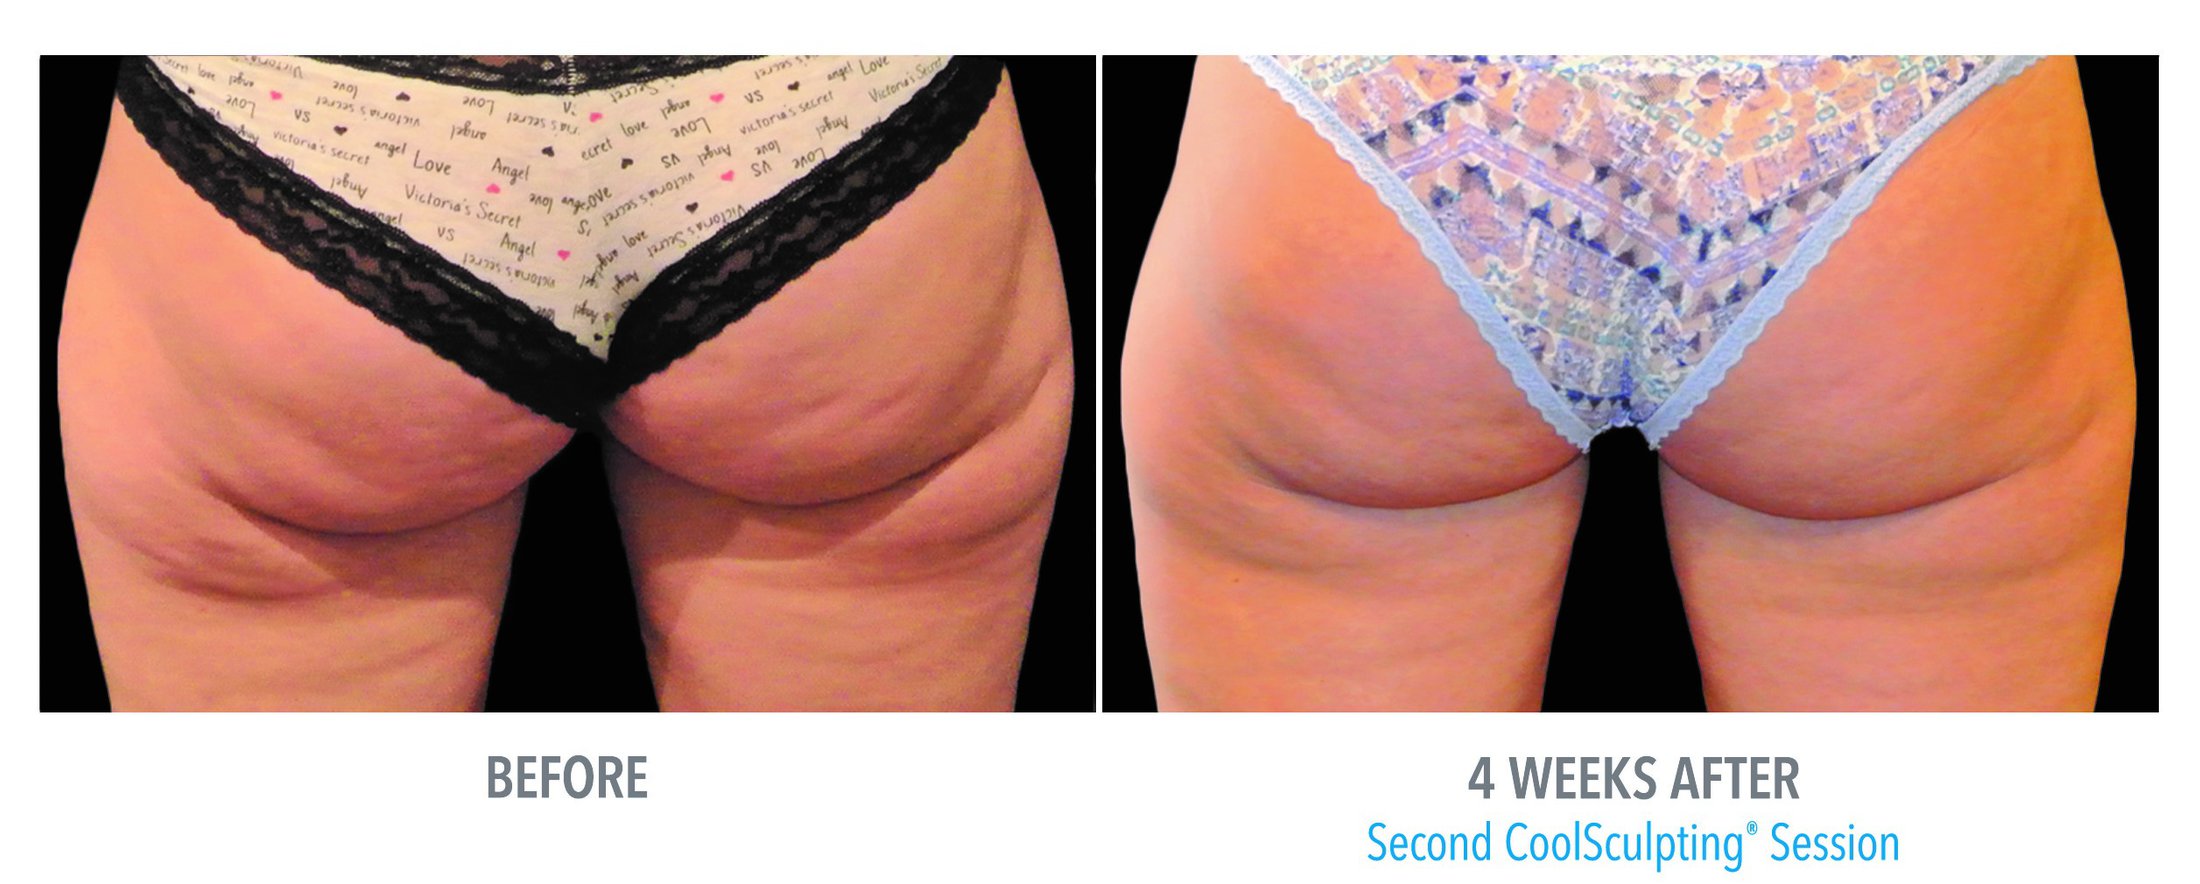 Coolsculpting Before and After Feature 2